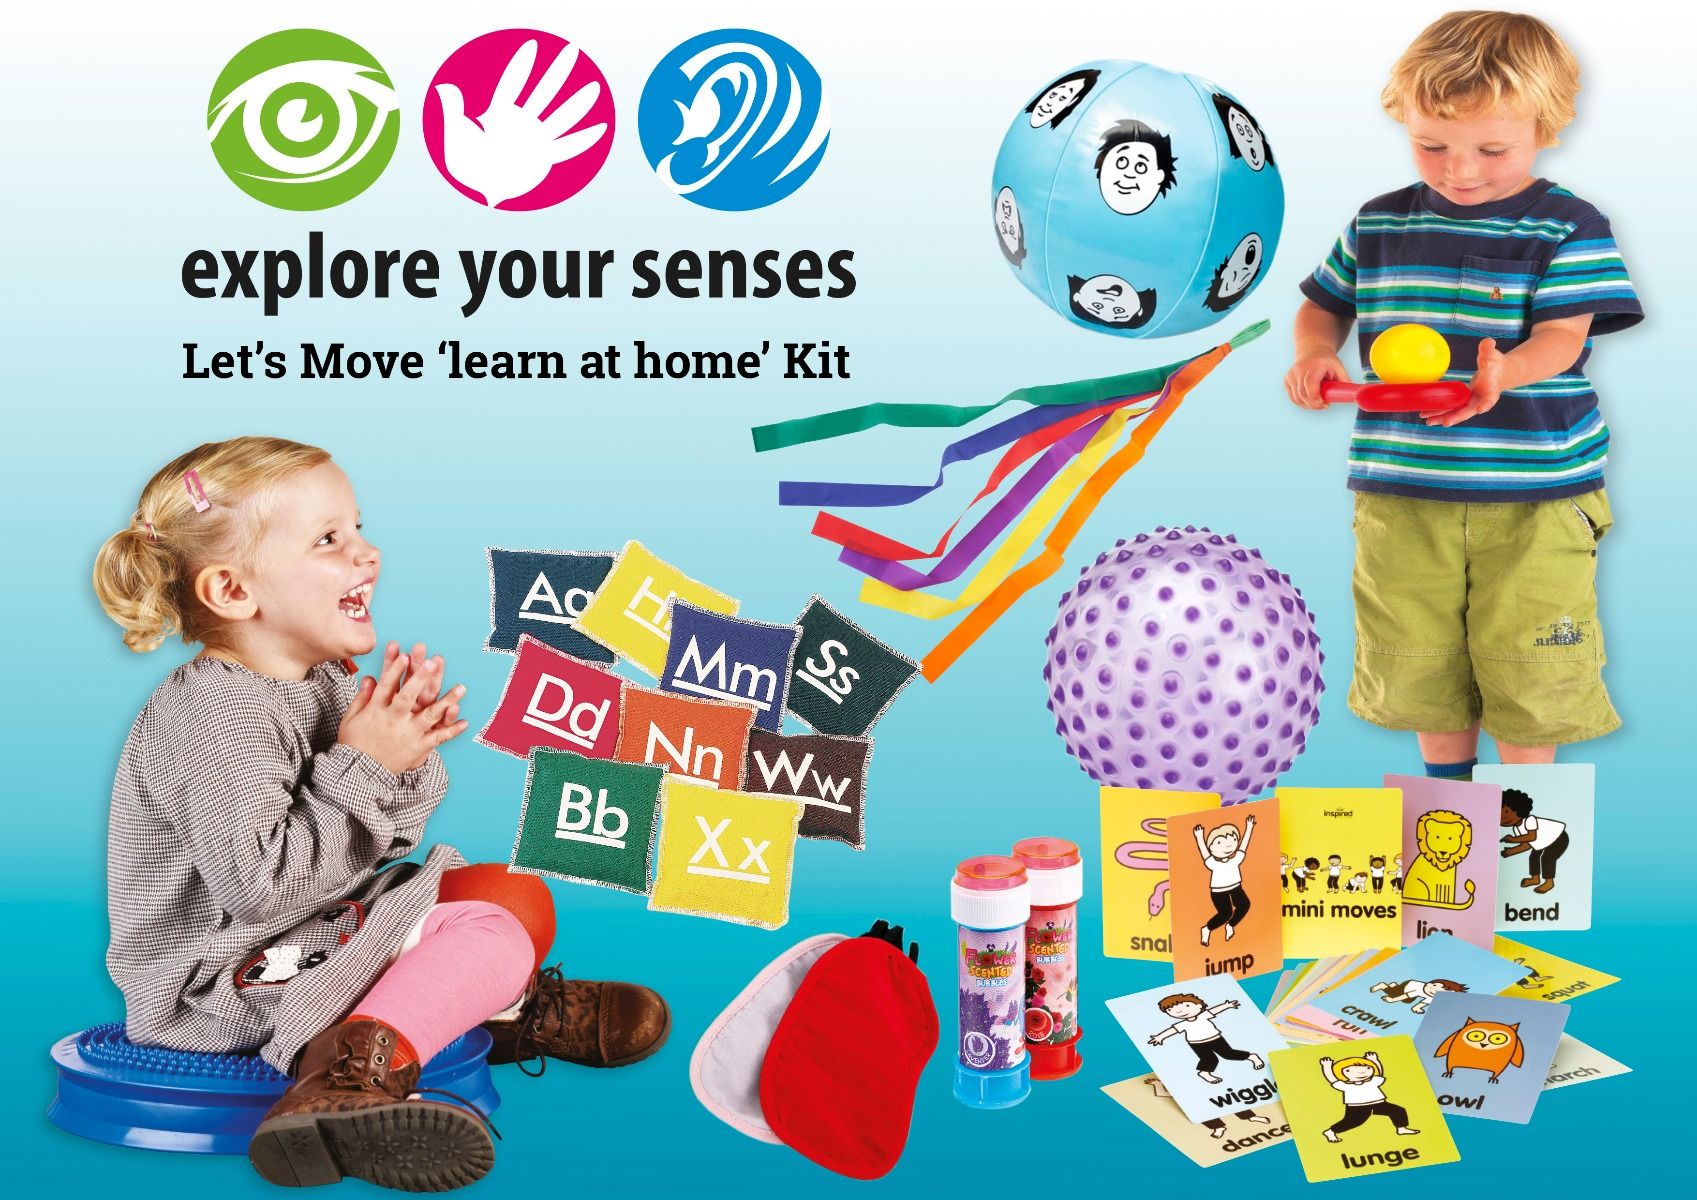 Let's Move 'LEARN AT HOME' Kit